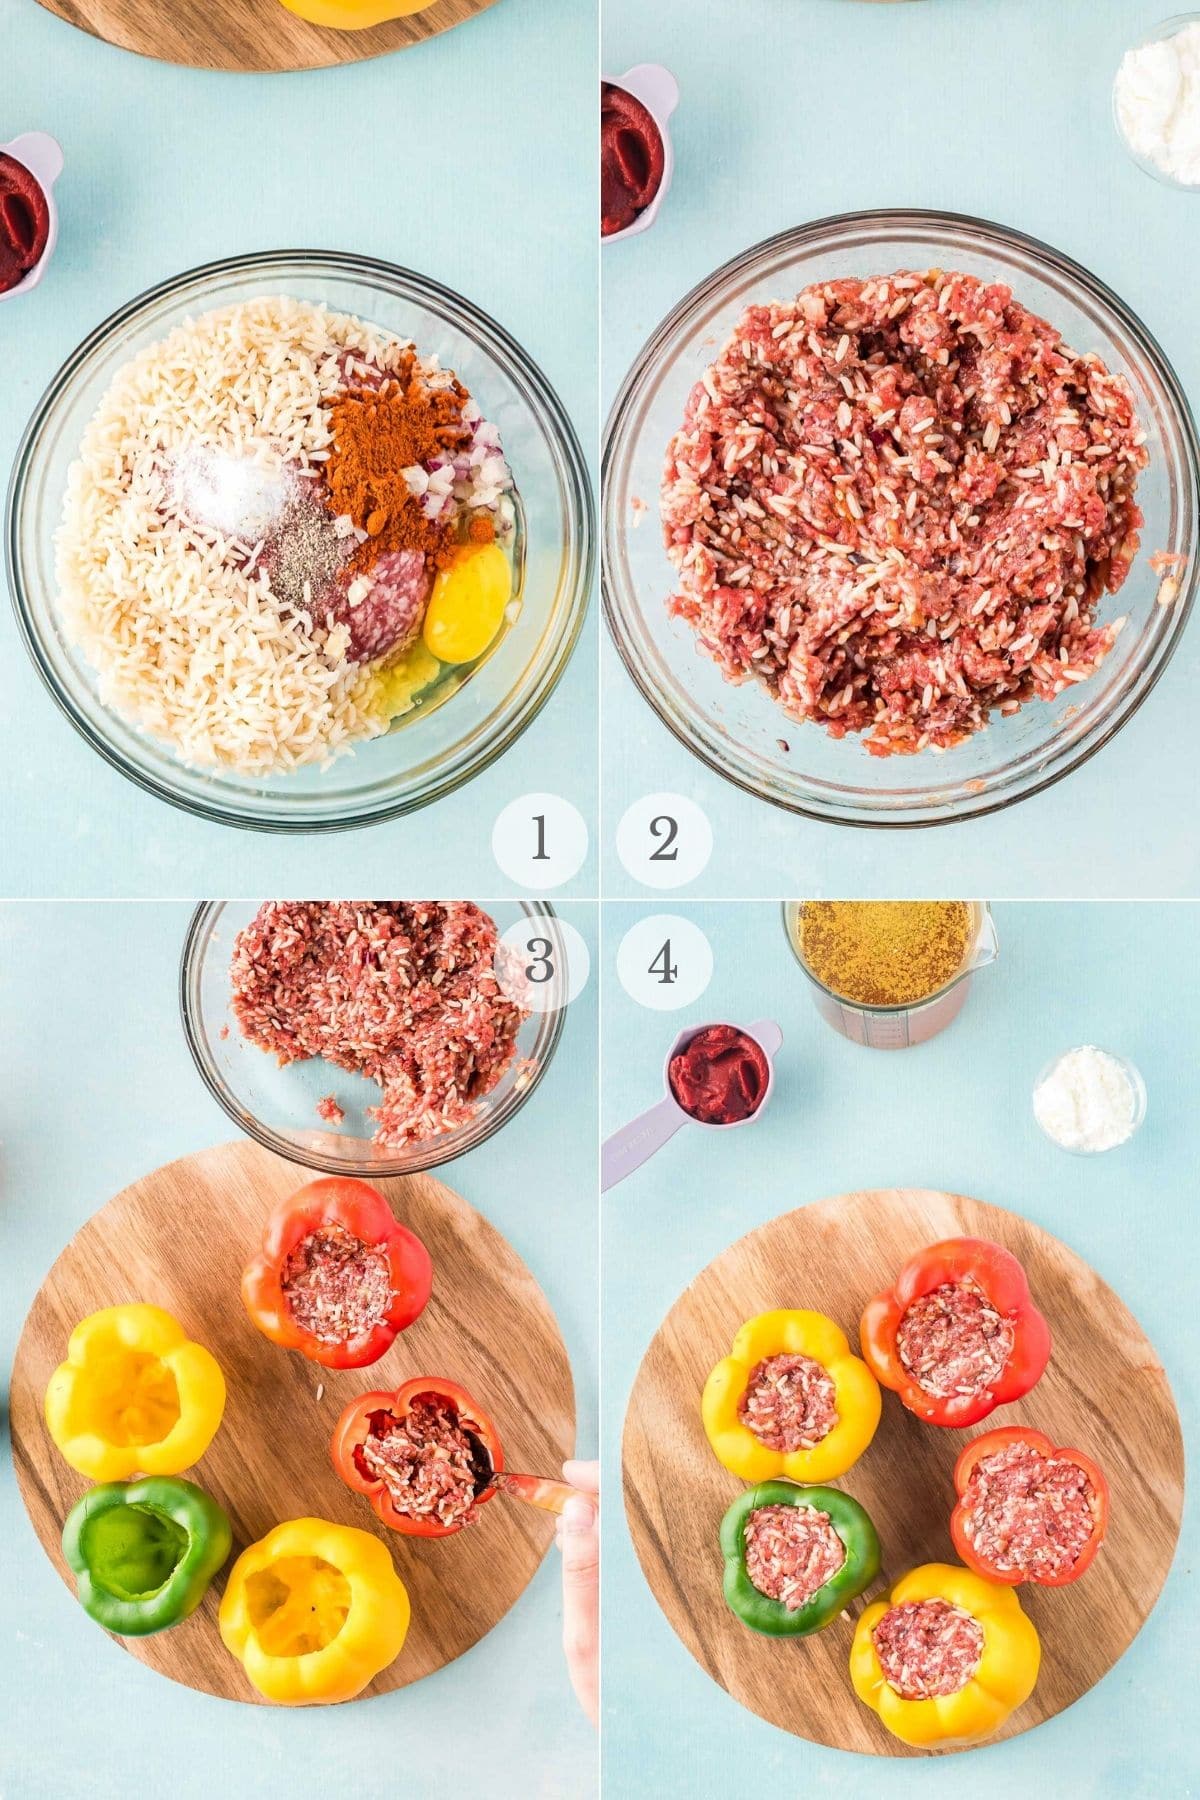 instant pot stuffed peppers recipe steps 1-4